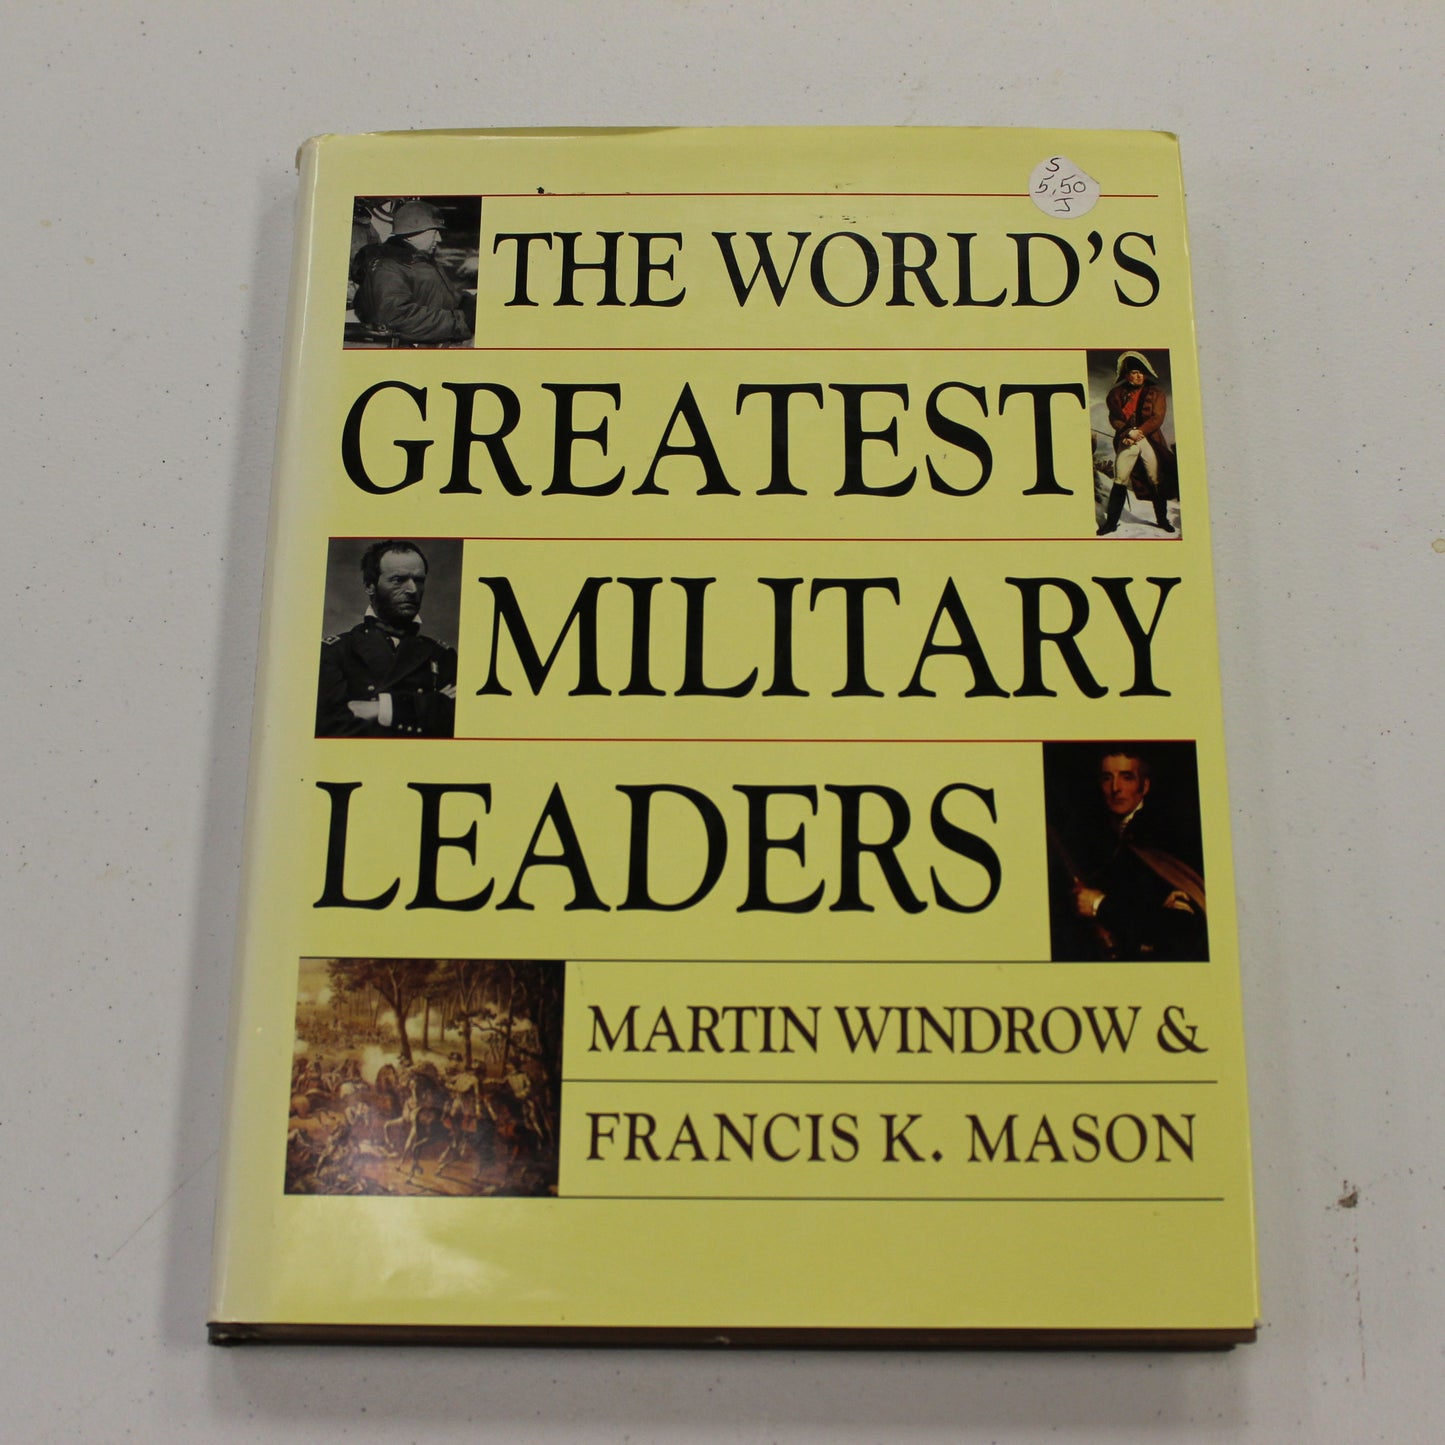 THE WORLD'S GREATEST MILITARY LEADERS